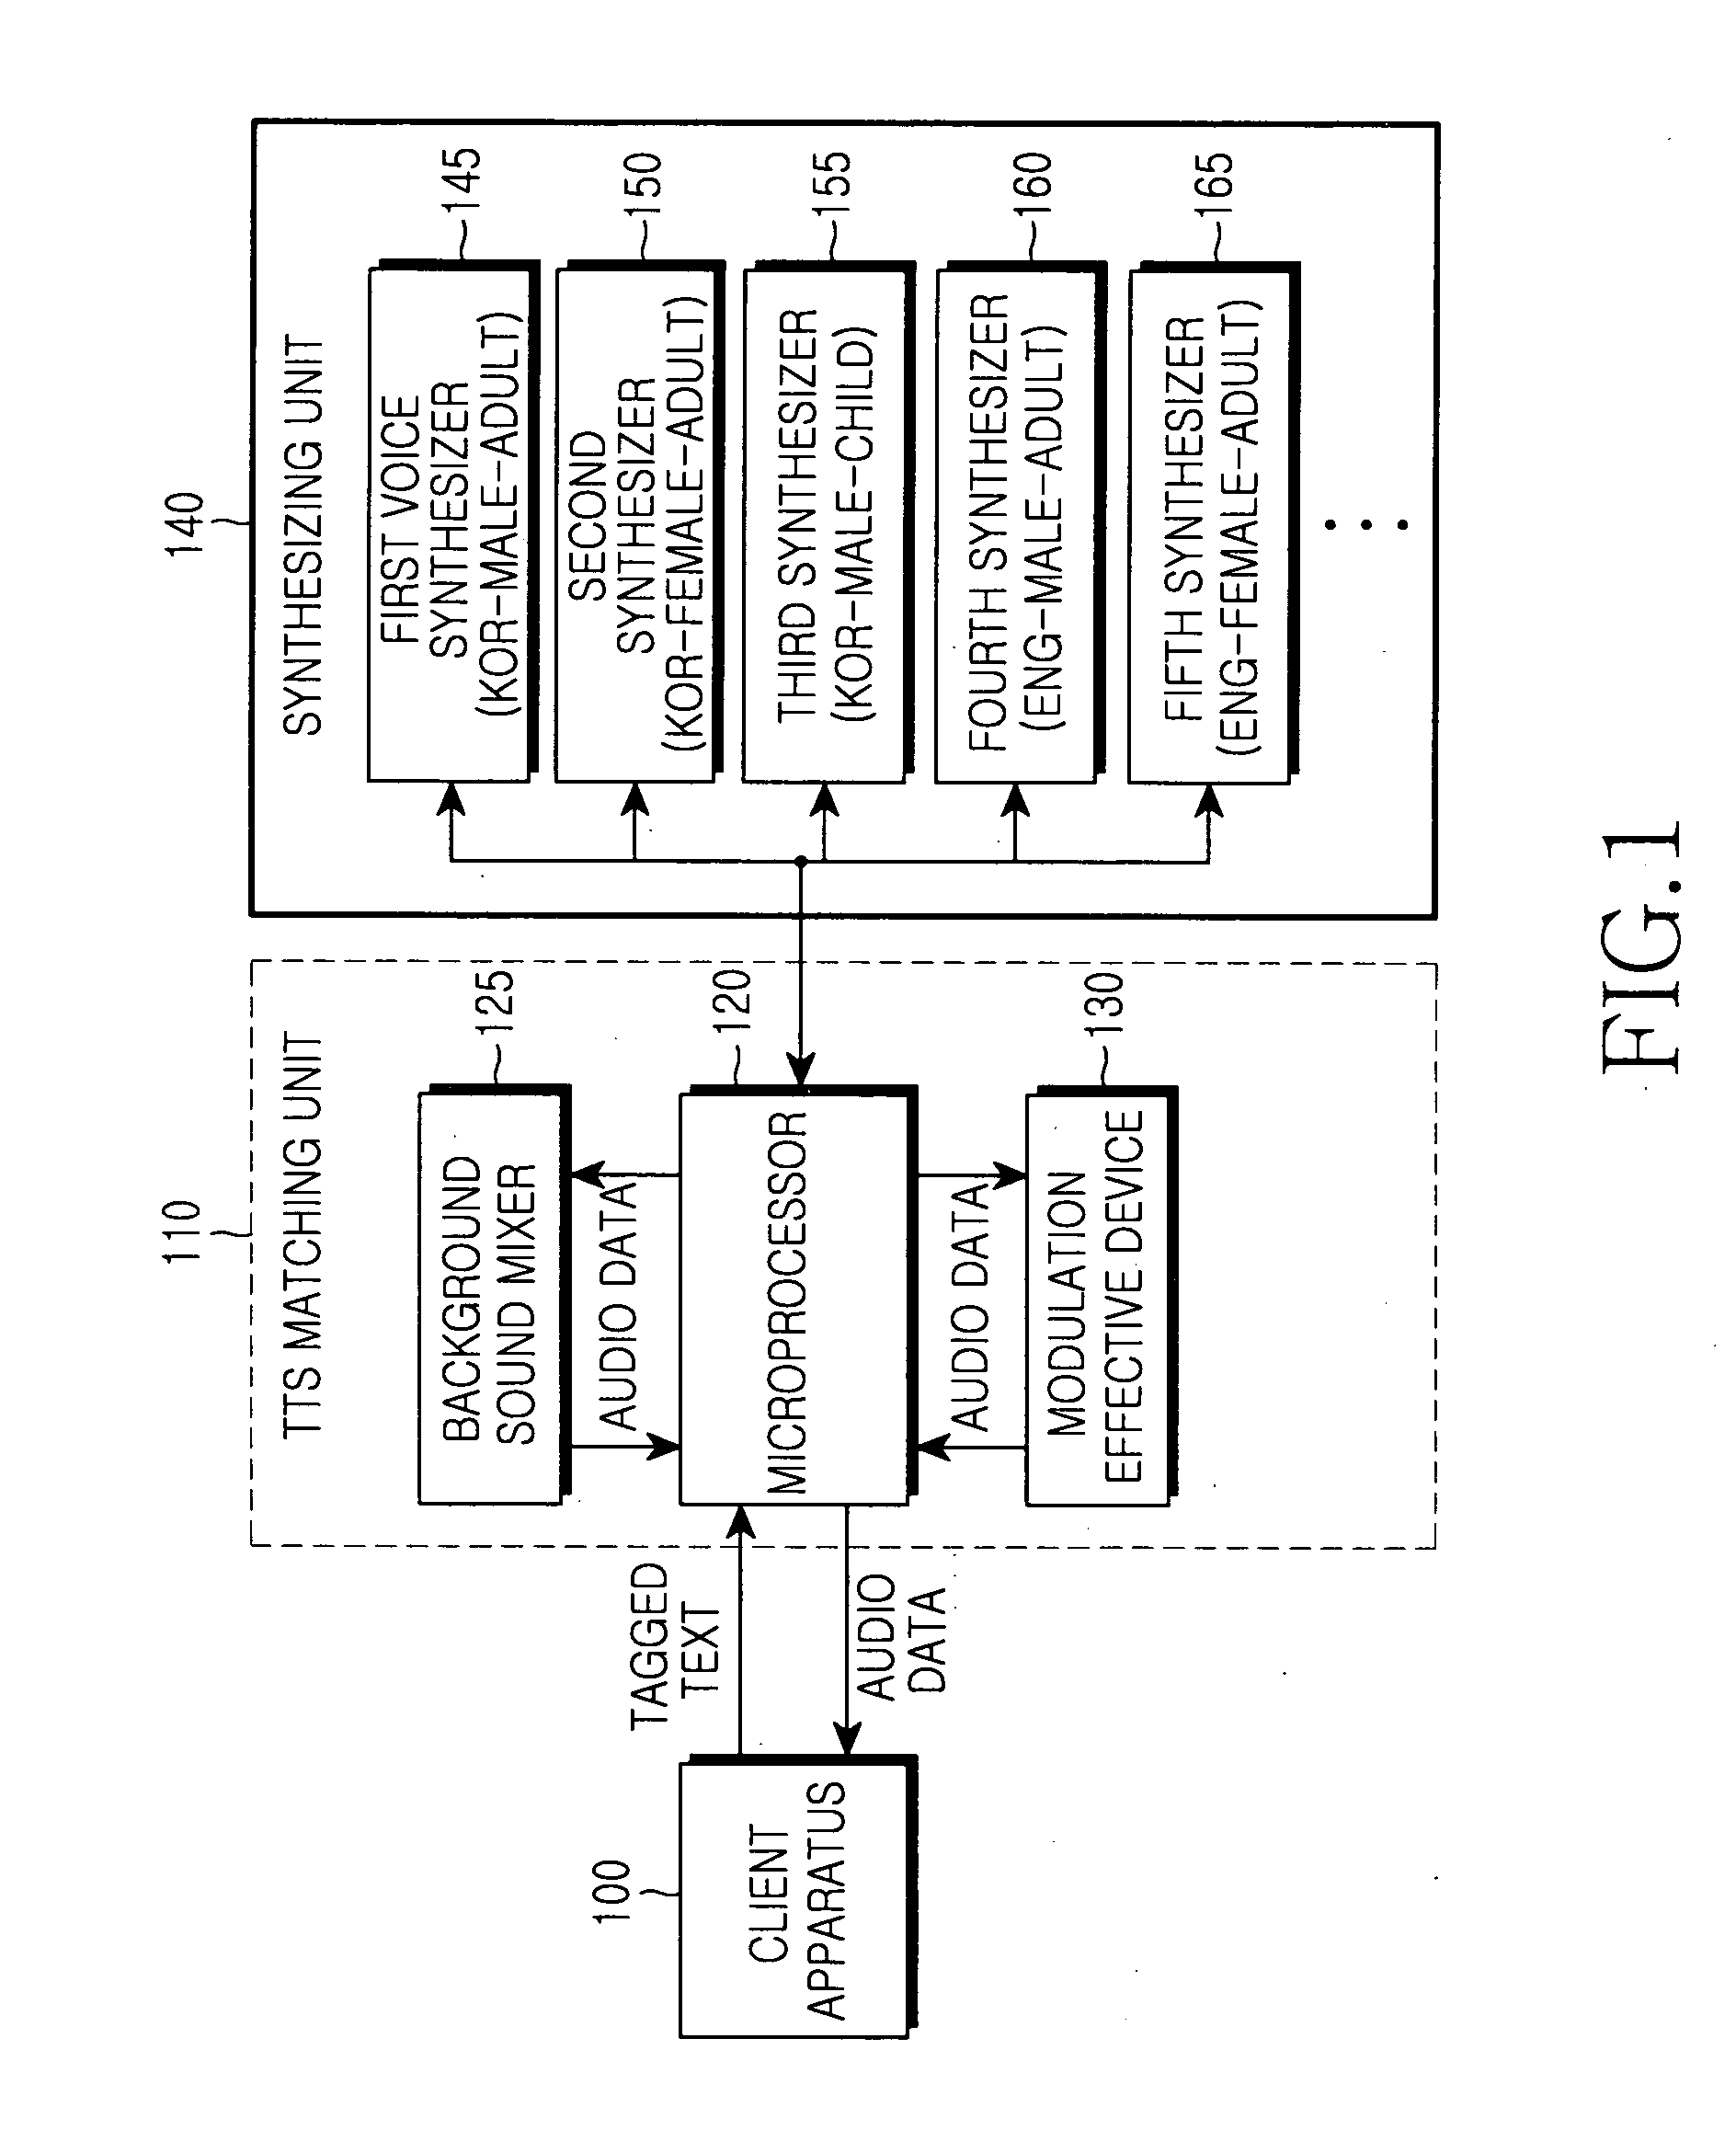 Method for synthesizing various voices by controlling a plurality of voice synthesizers and a system therefor